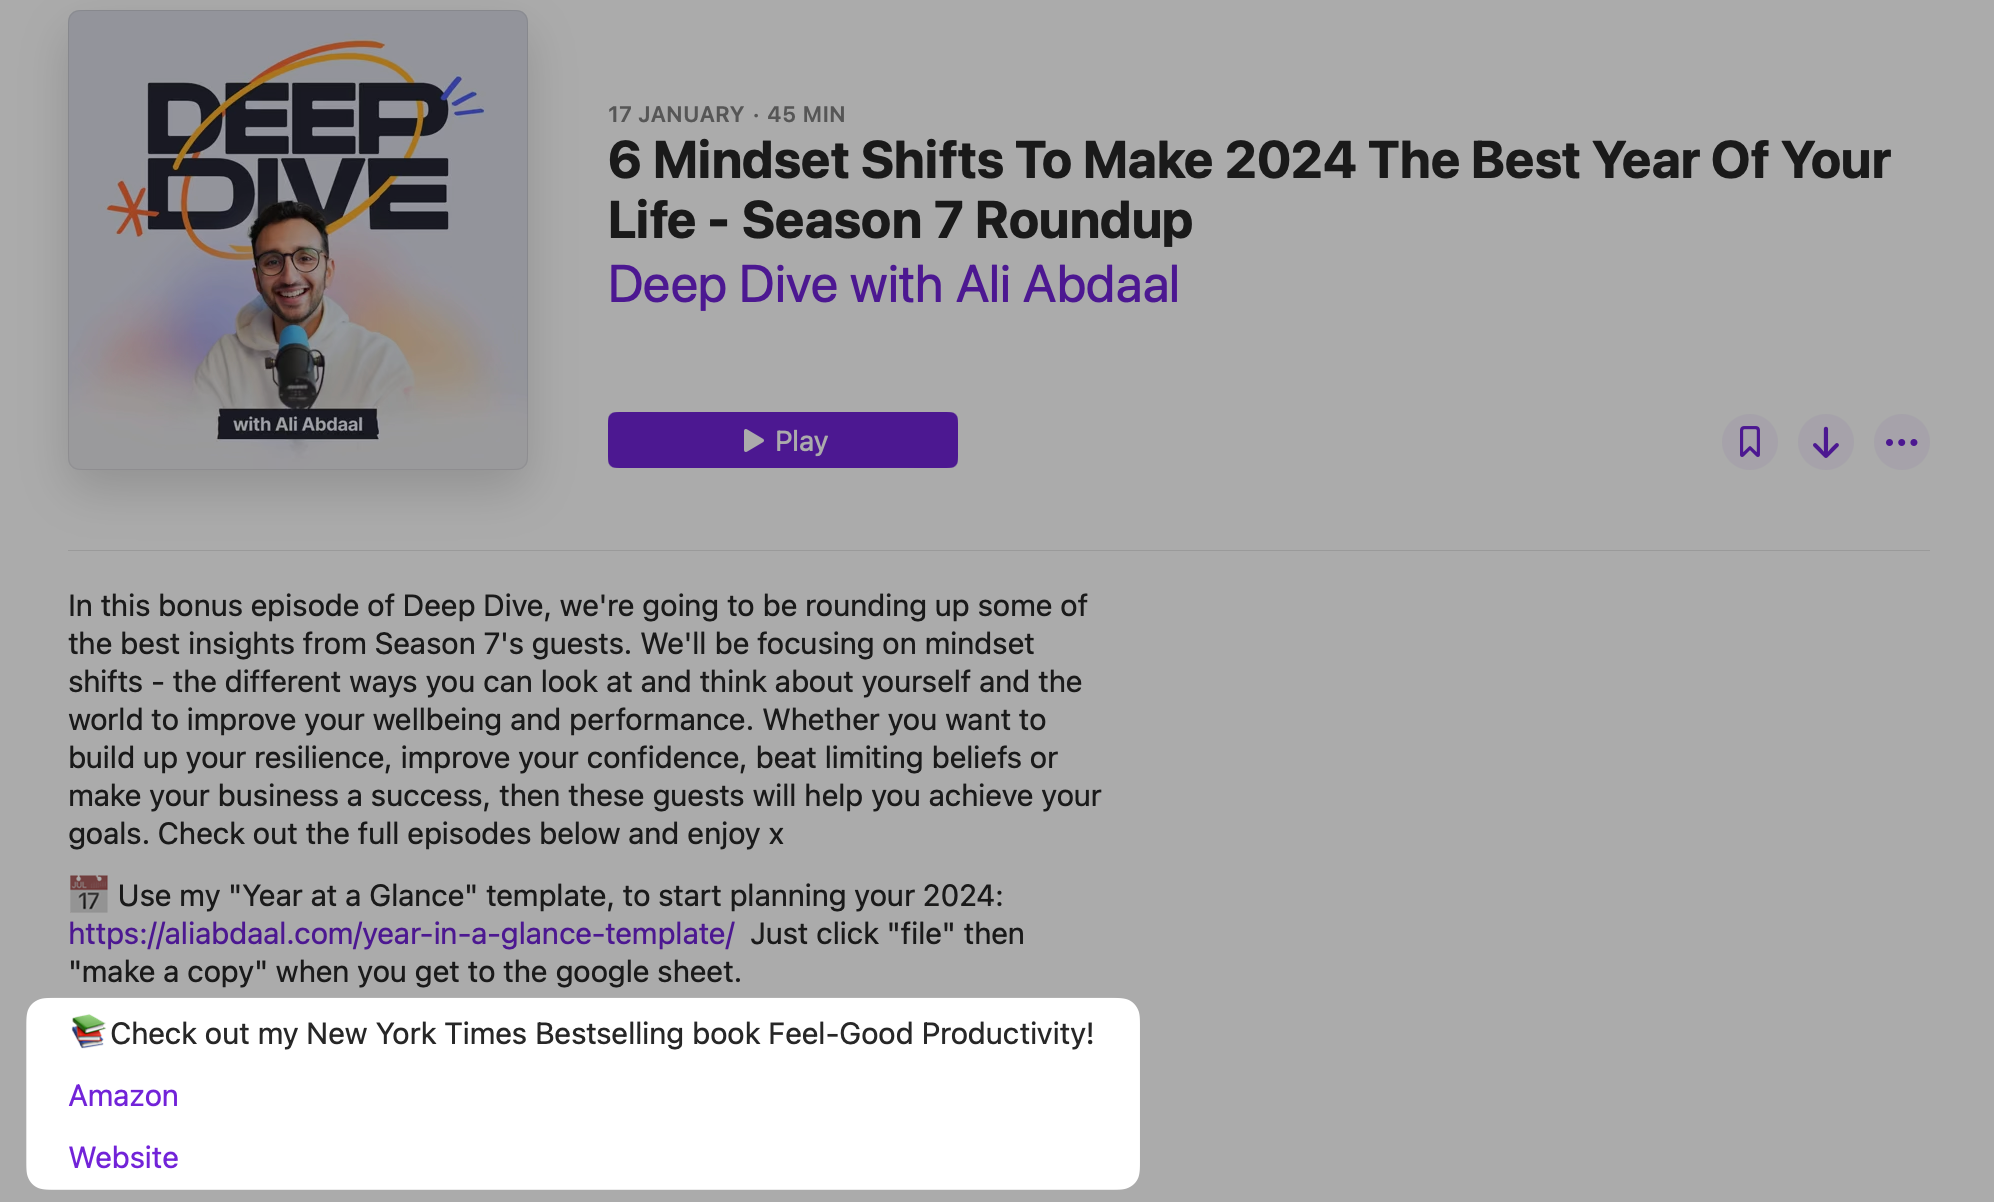 Apple Podcasts listing for a Deep Dive podcast episode that promotes a productivity book in the show notes.